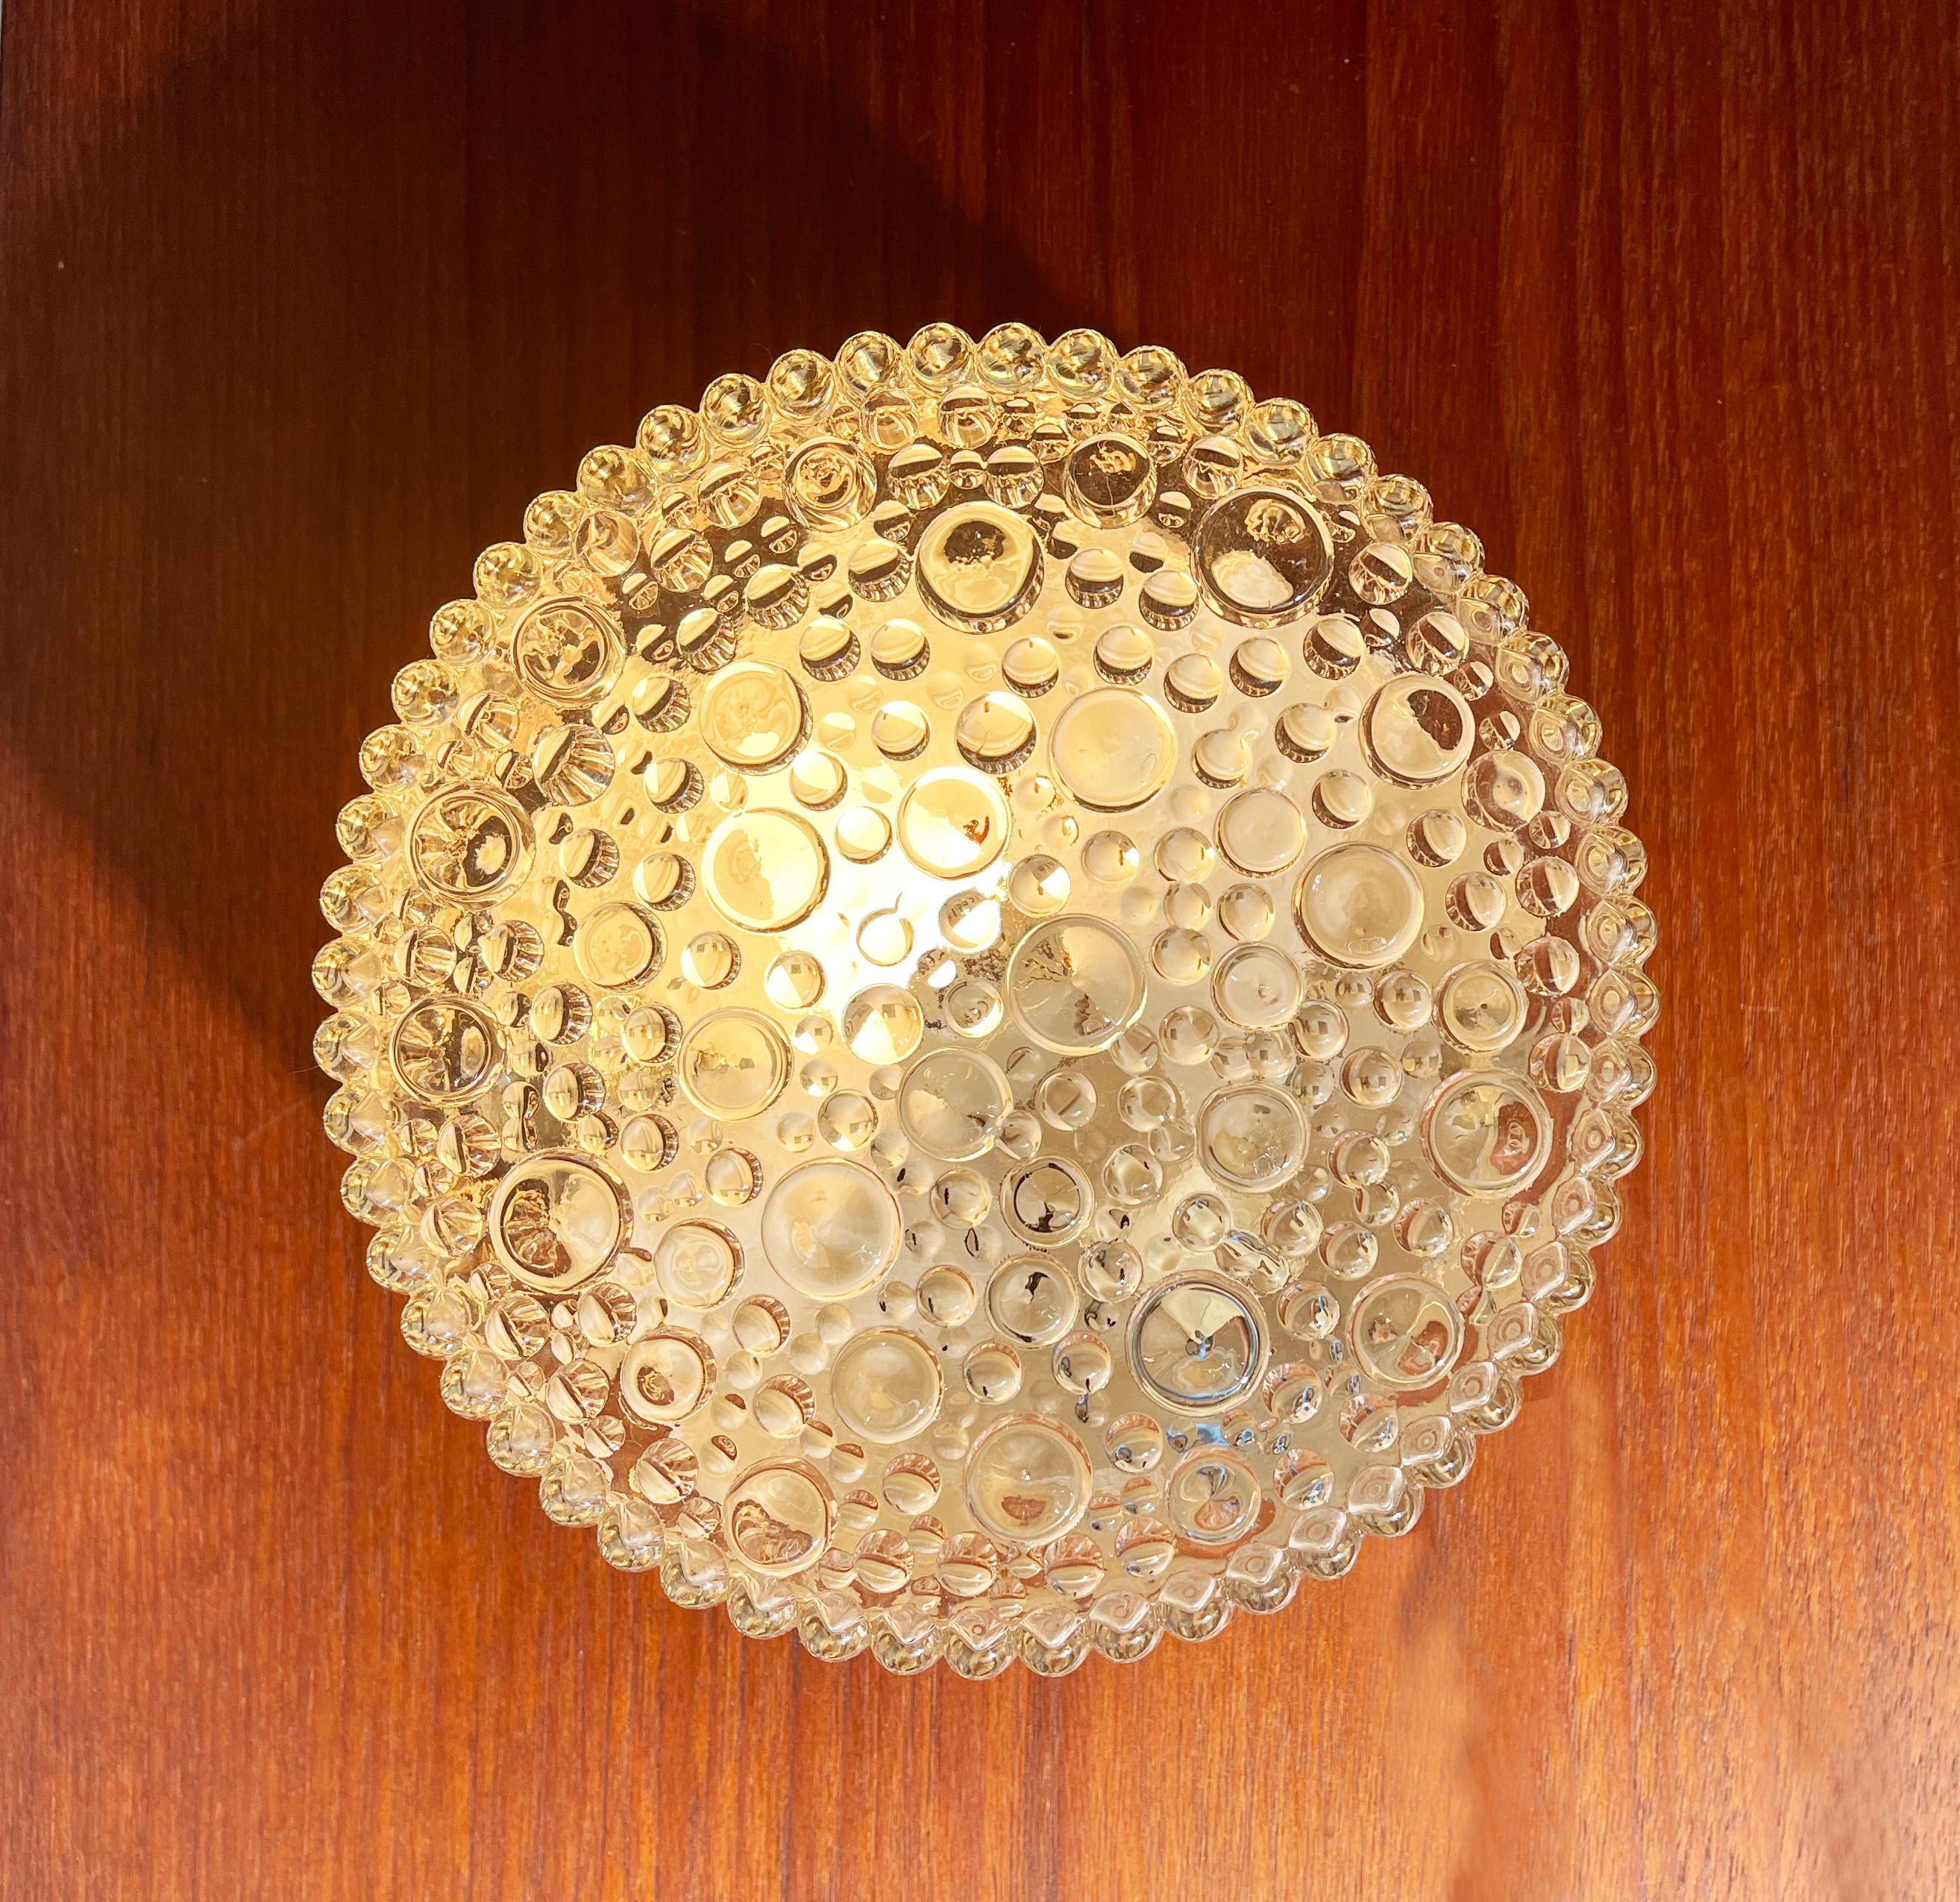 Gorgeous flush base ceiling or wall lamp in the style of Helena Tynell. 
Comes in a round shape with the bubbles growing on ''stems''.
Beautiful warm light, funky original German mid-century design.

Can be wall or ceiling mounted.
The glass shade